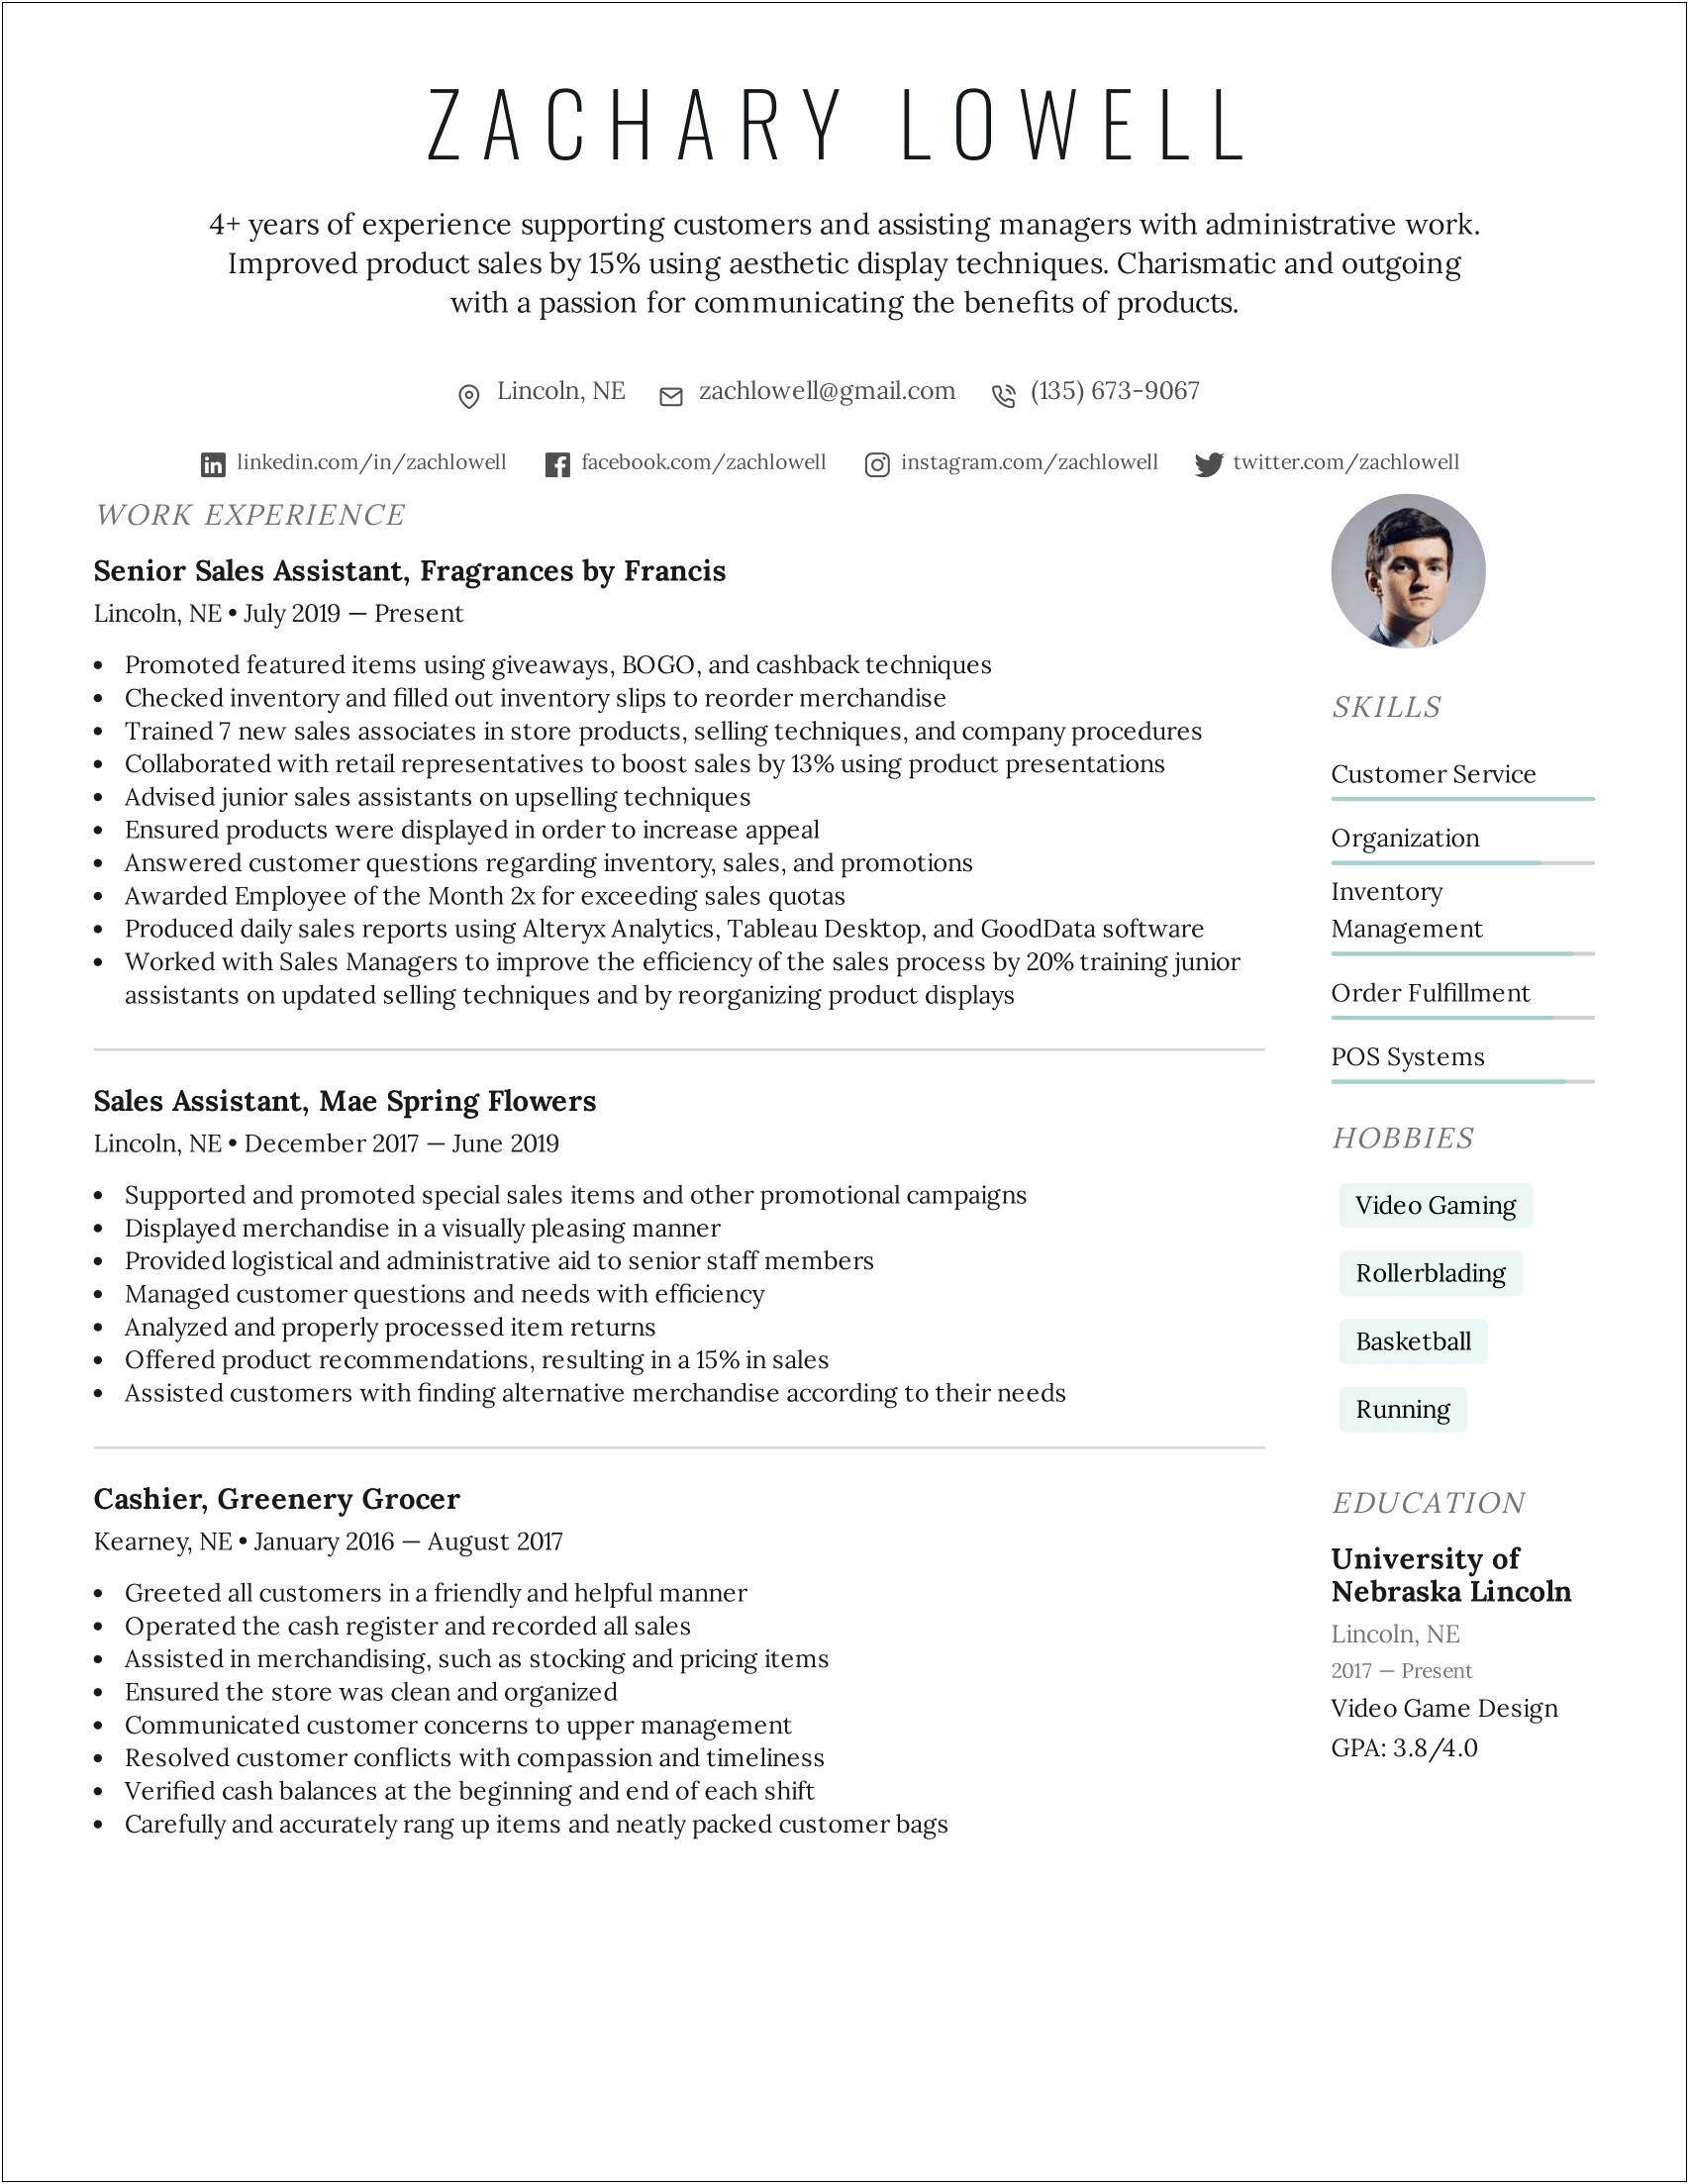 Resume Format For Sales And Service Manager